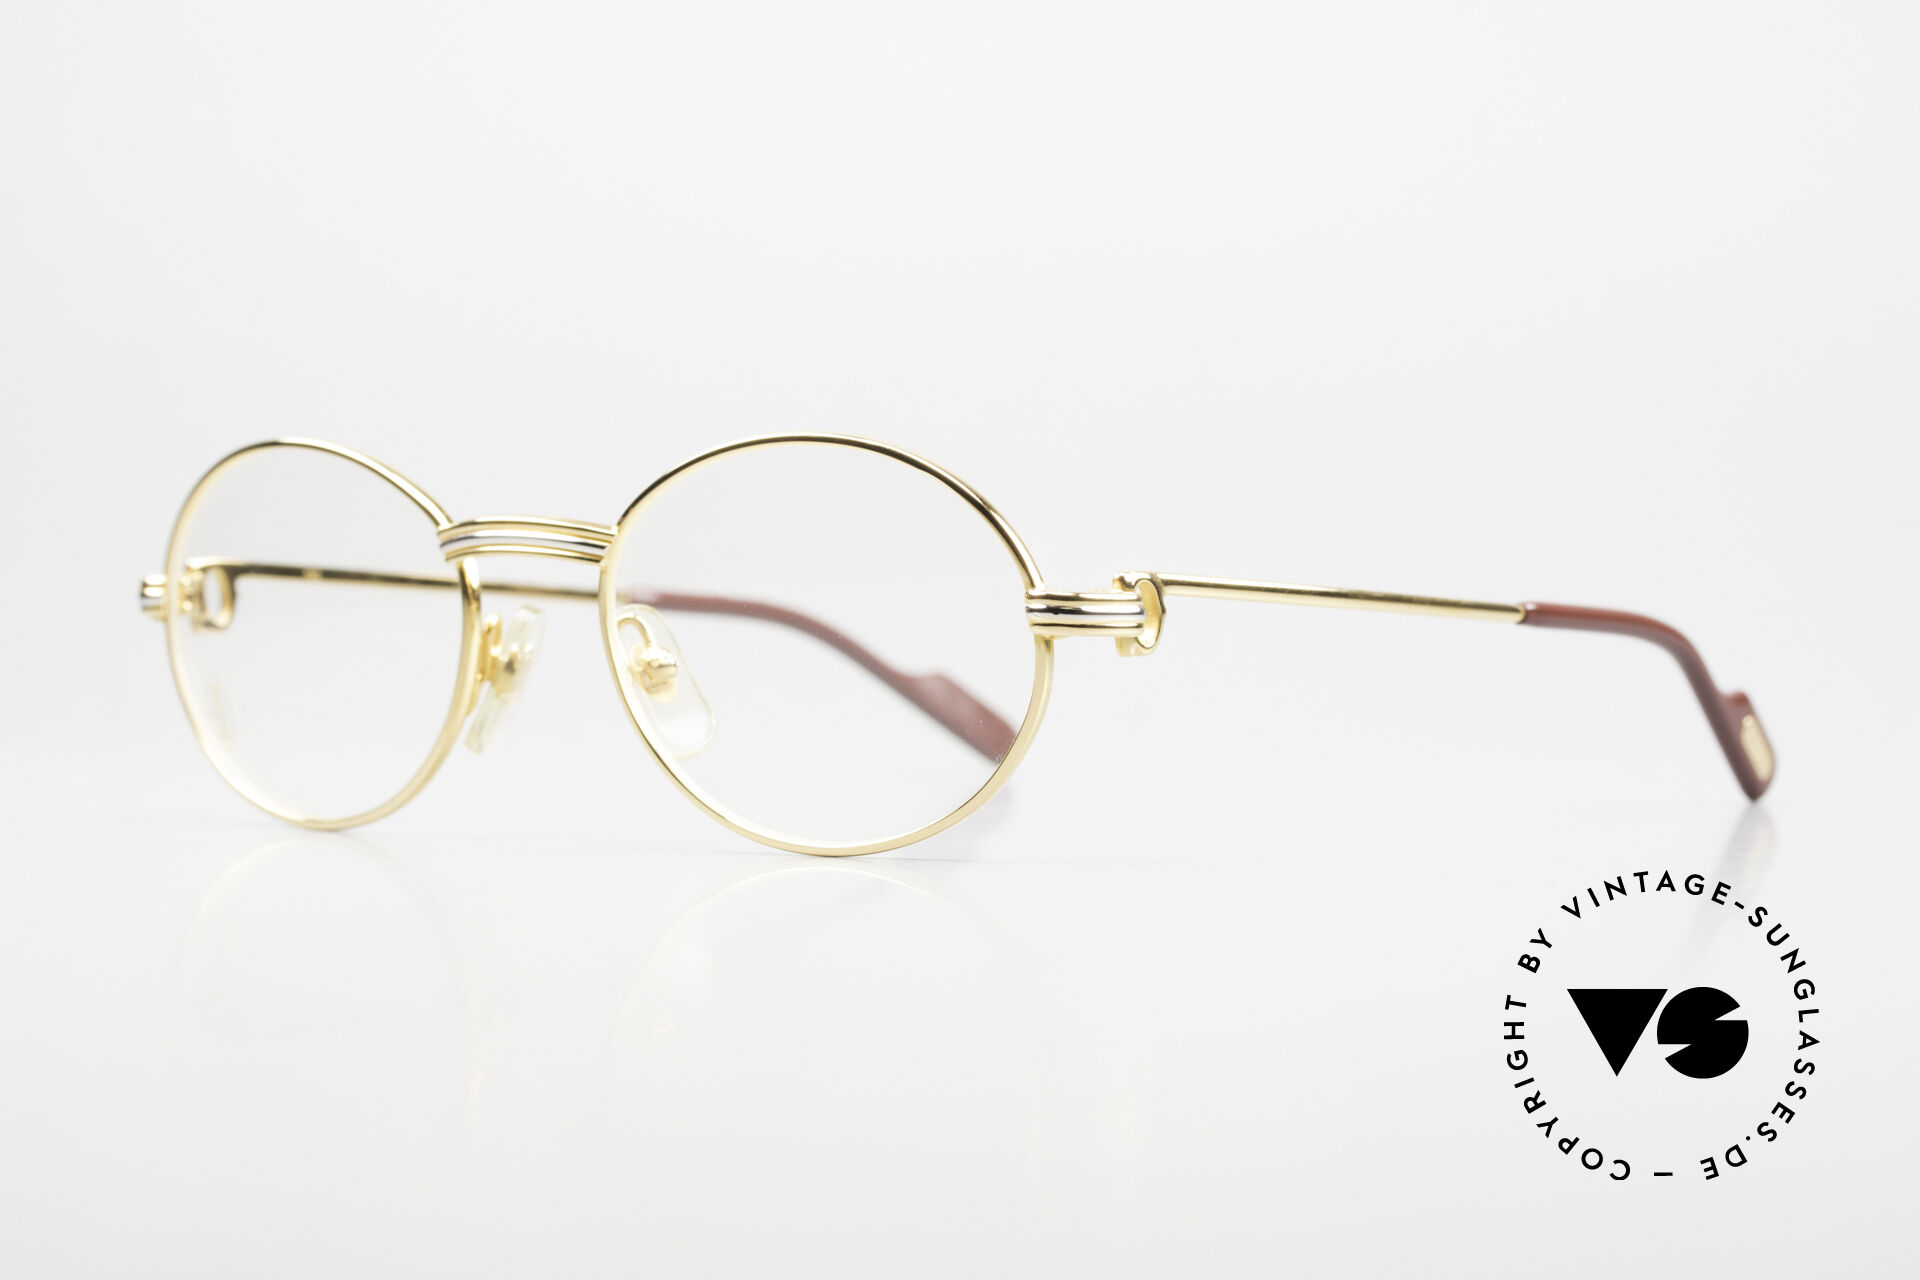 Cartier Saint Honore 22ct Gold-Plated Eyeglasses